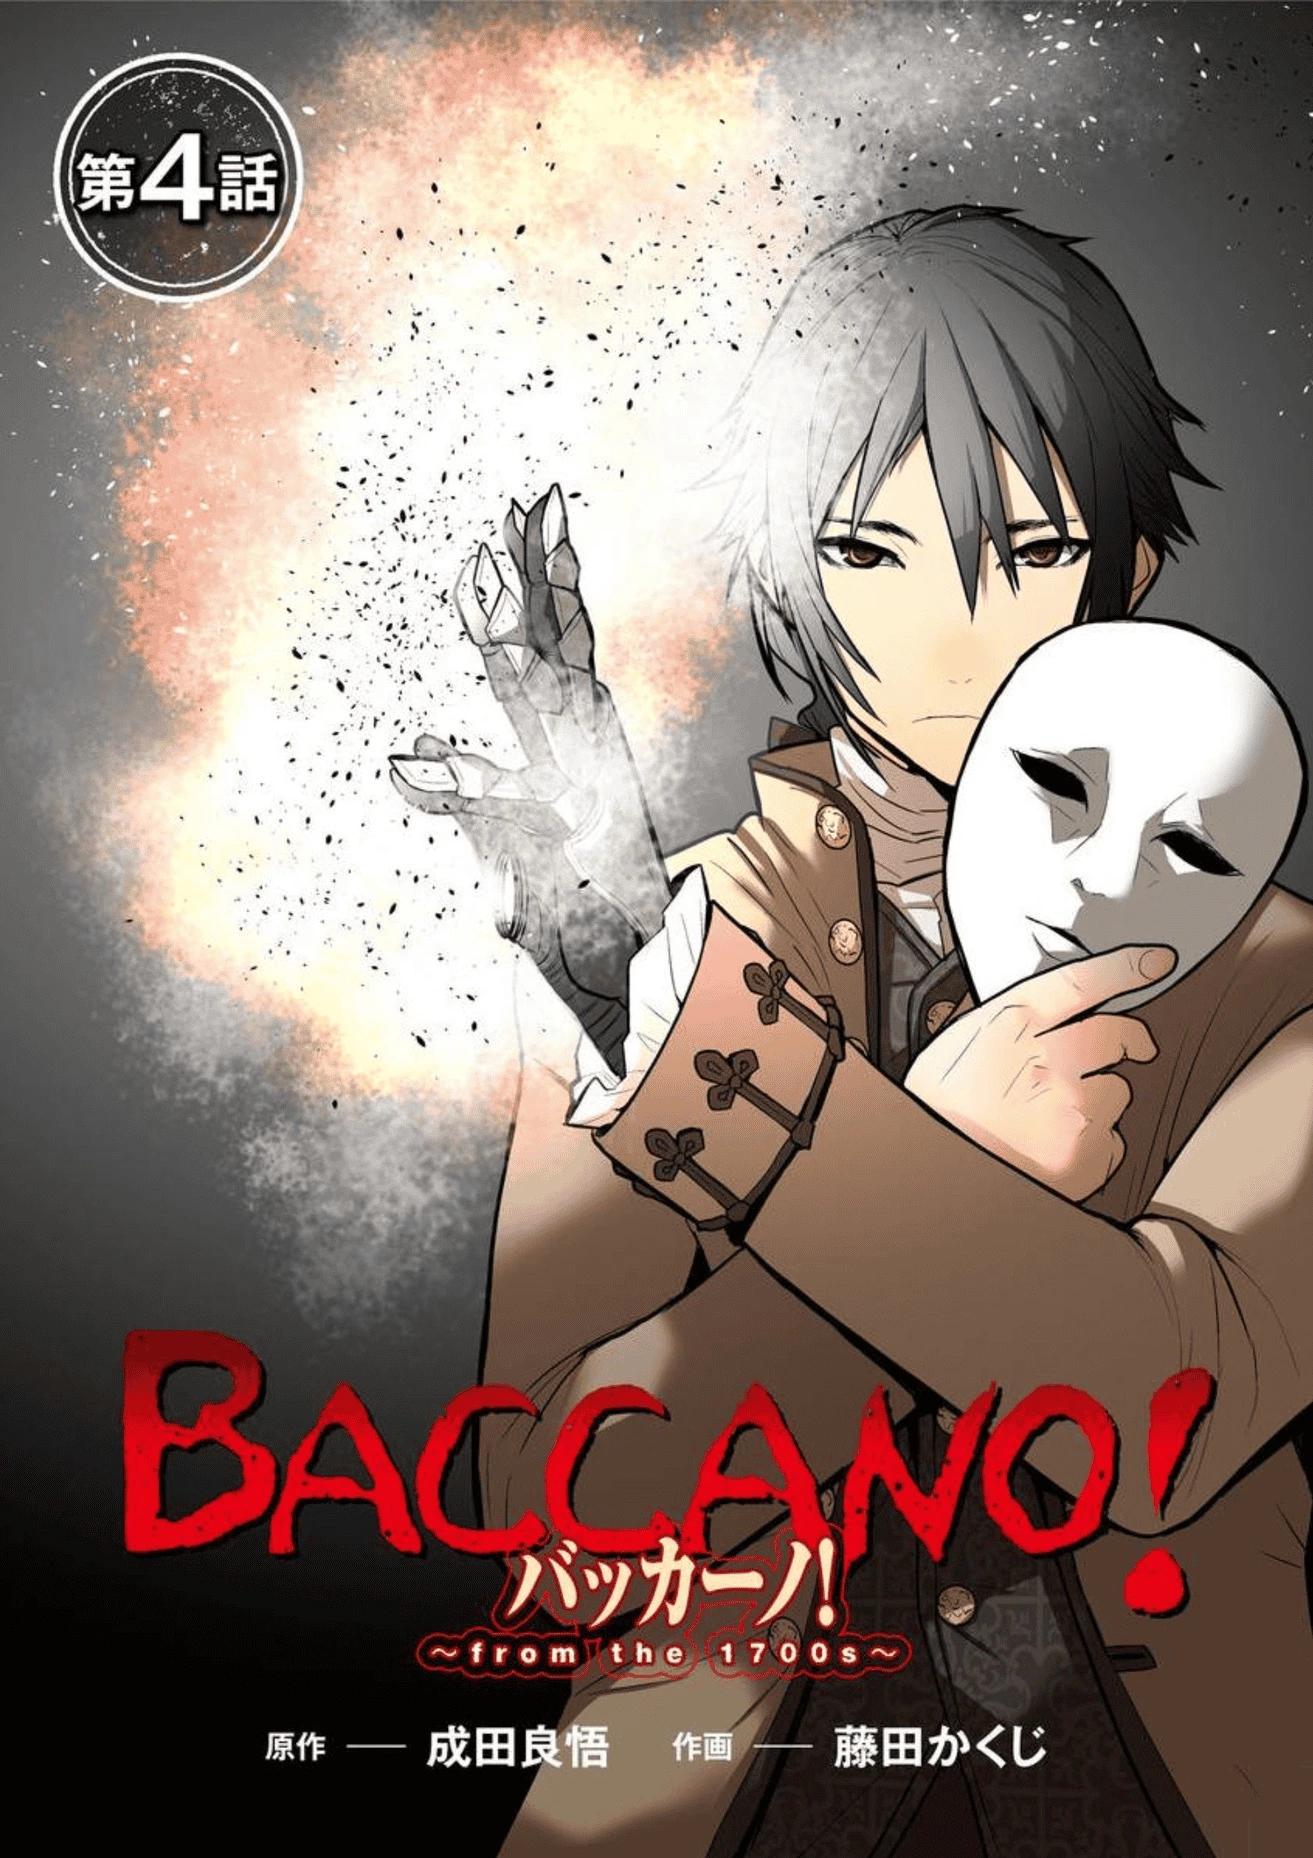 BACCANO! 永生之酒！~from the 1700s~ - 第04話 - 1